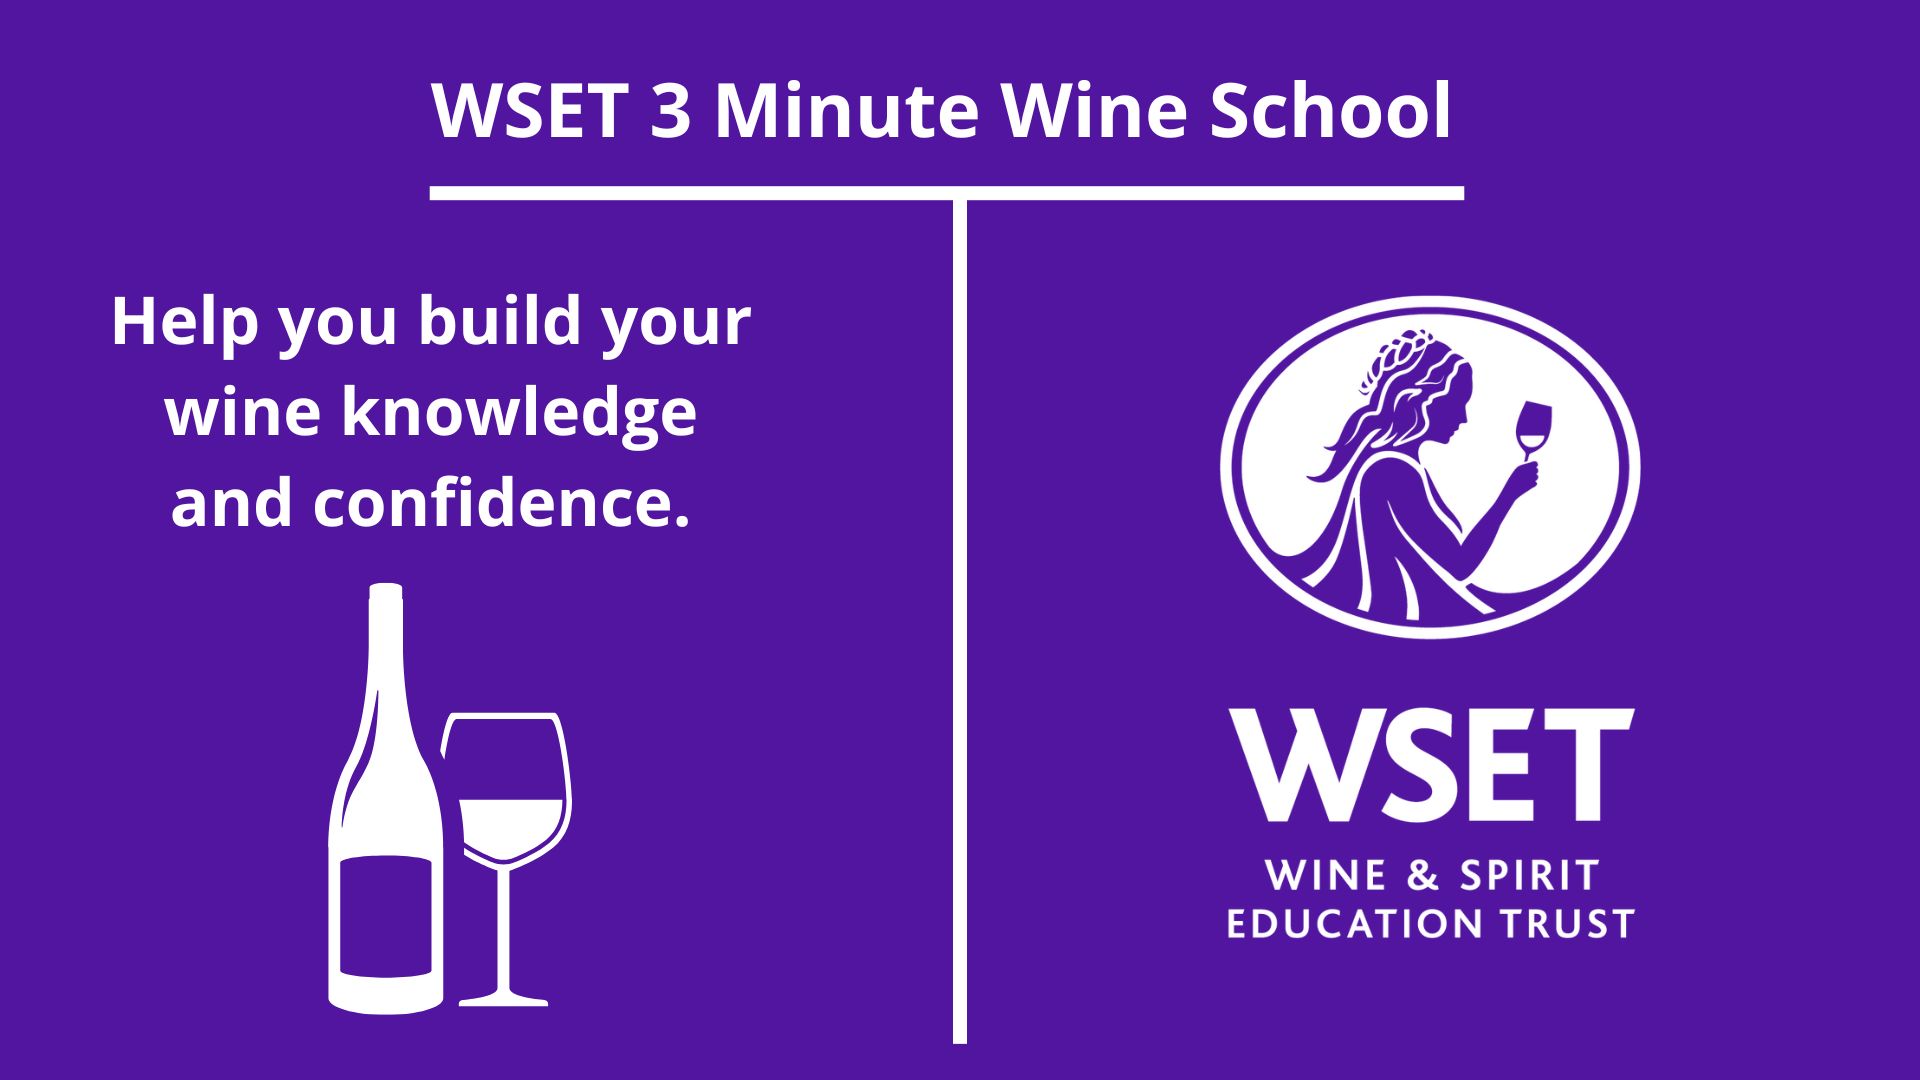 WSET’s Three Minute Wine School email course